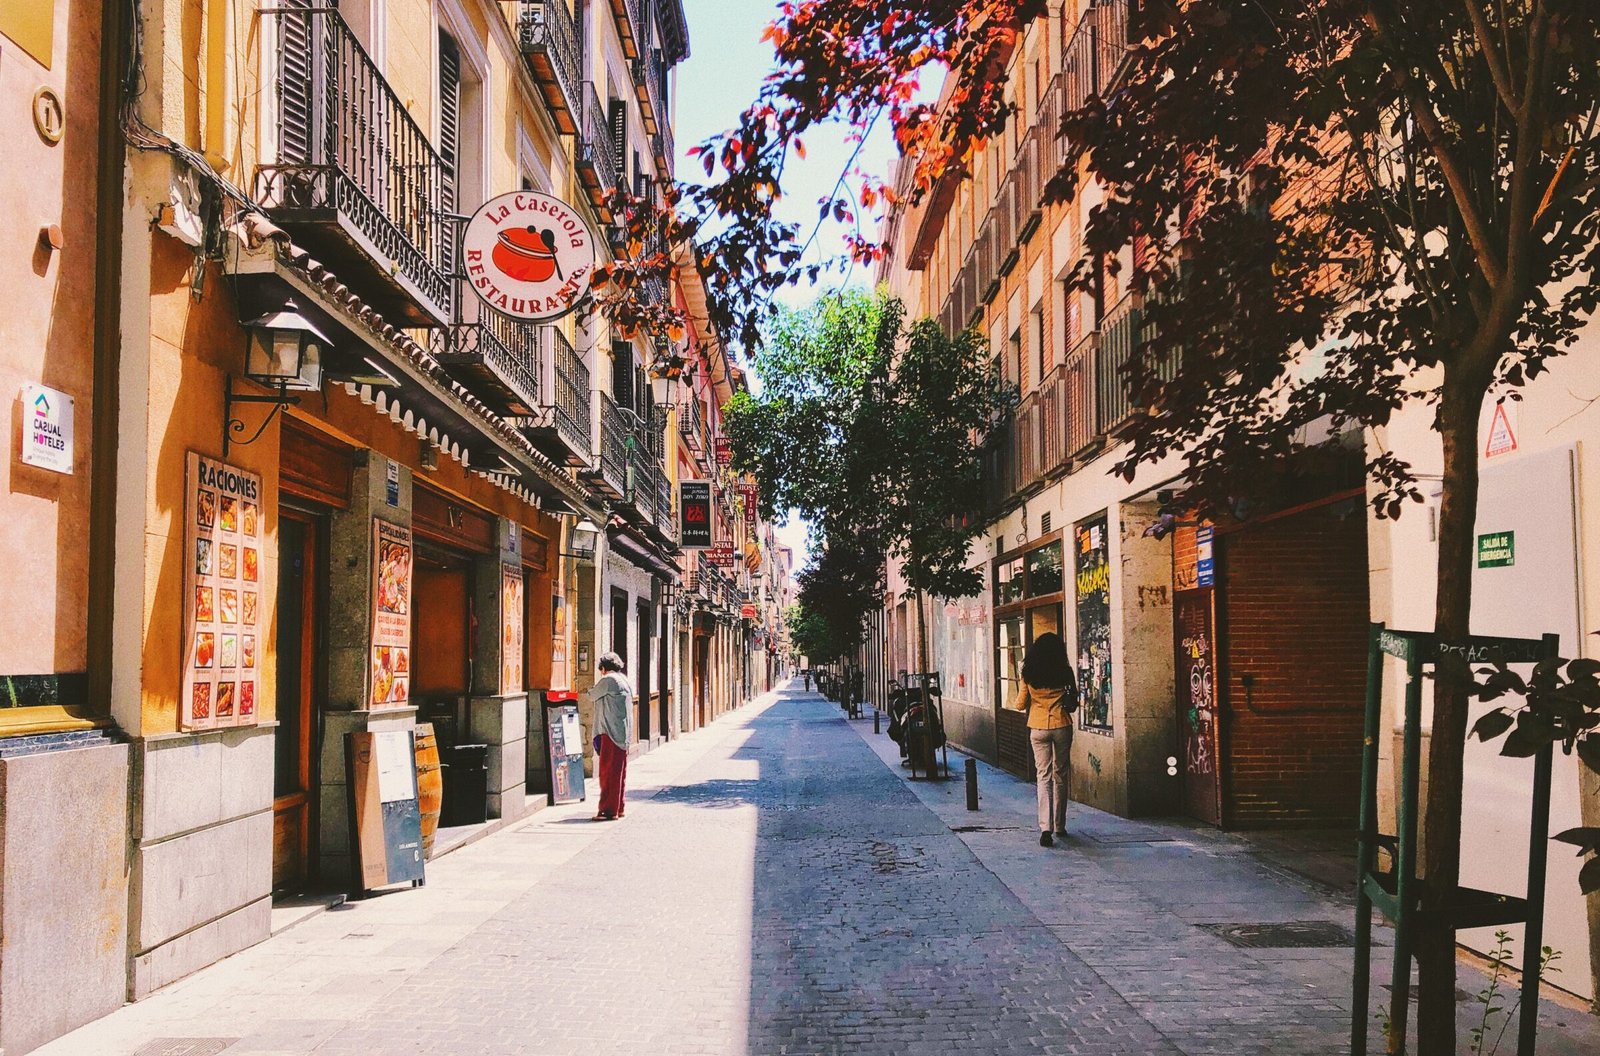 A street scene of Madrid showing small bars and shops along a tree lined cobbled street